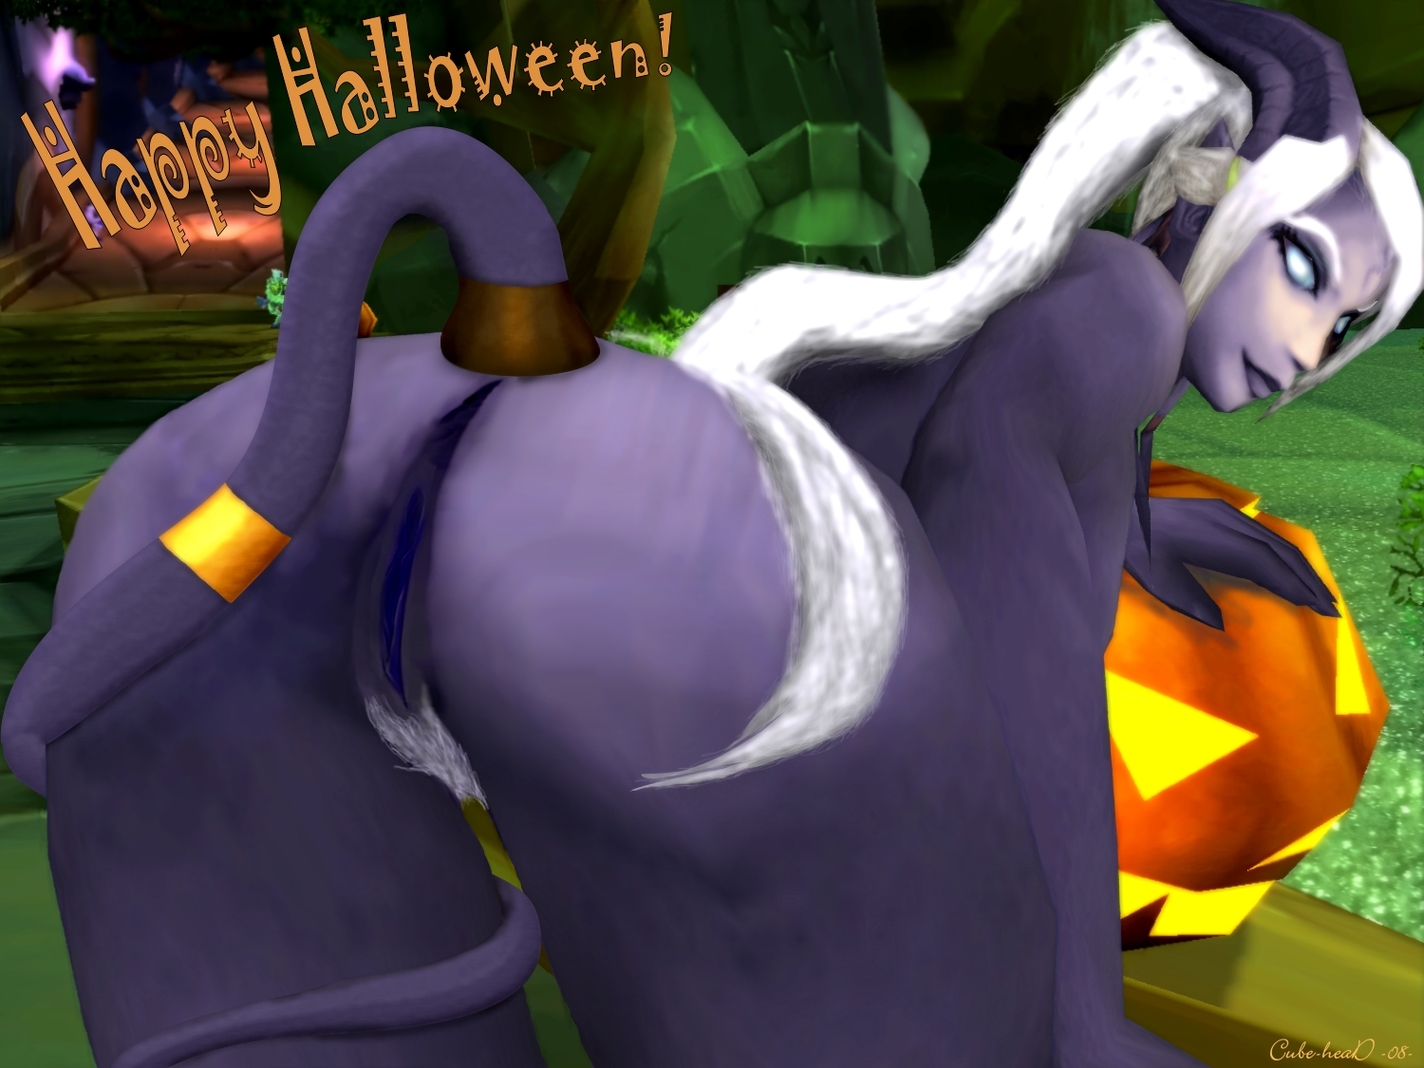 Trick or Treat? Treat! [Draenei/Pinup]
2008 Halloween picture, where in the original picture her pussy was covered and if you clicked on the wrong link,
you wouldn't get to see Selanaars pussy, but a Tauren guys ass.
Keywords: Draenei;OC;pre2010;pinup